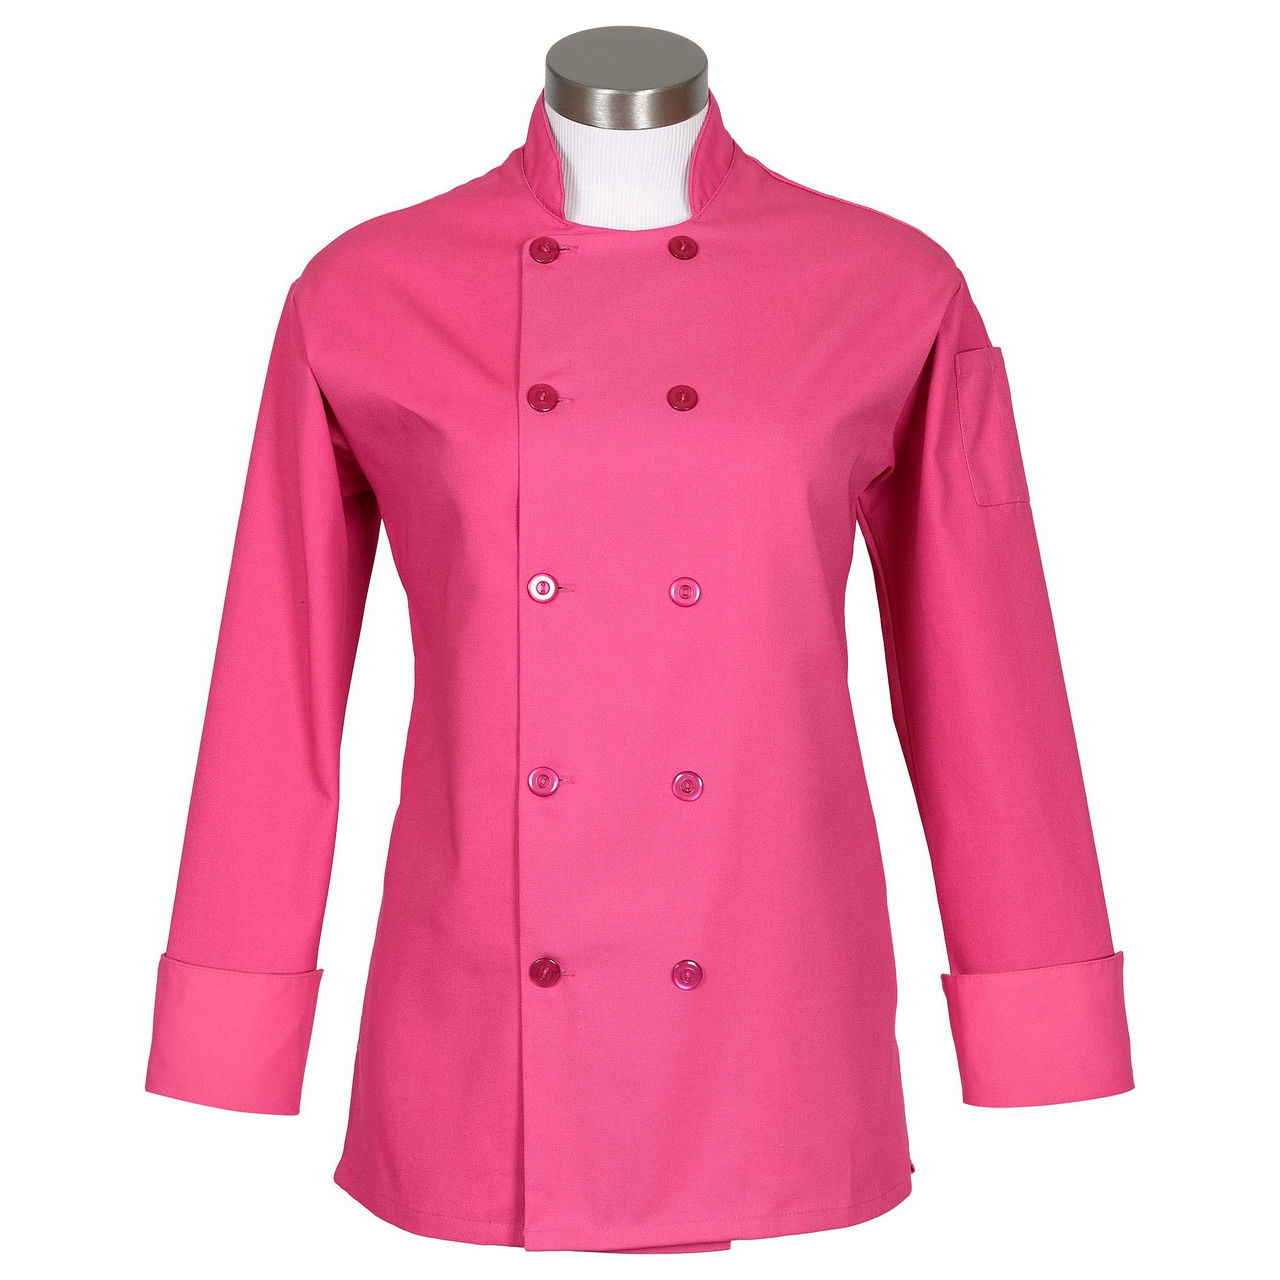 Does the chef coats womens long sleeve have any comfort features?